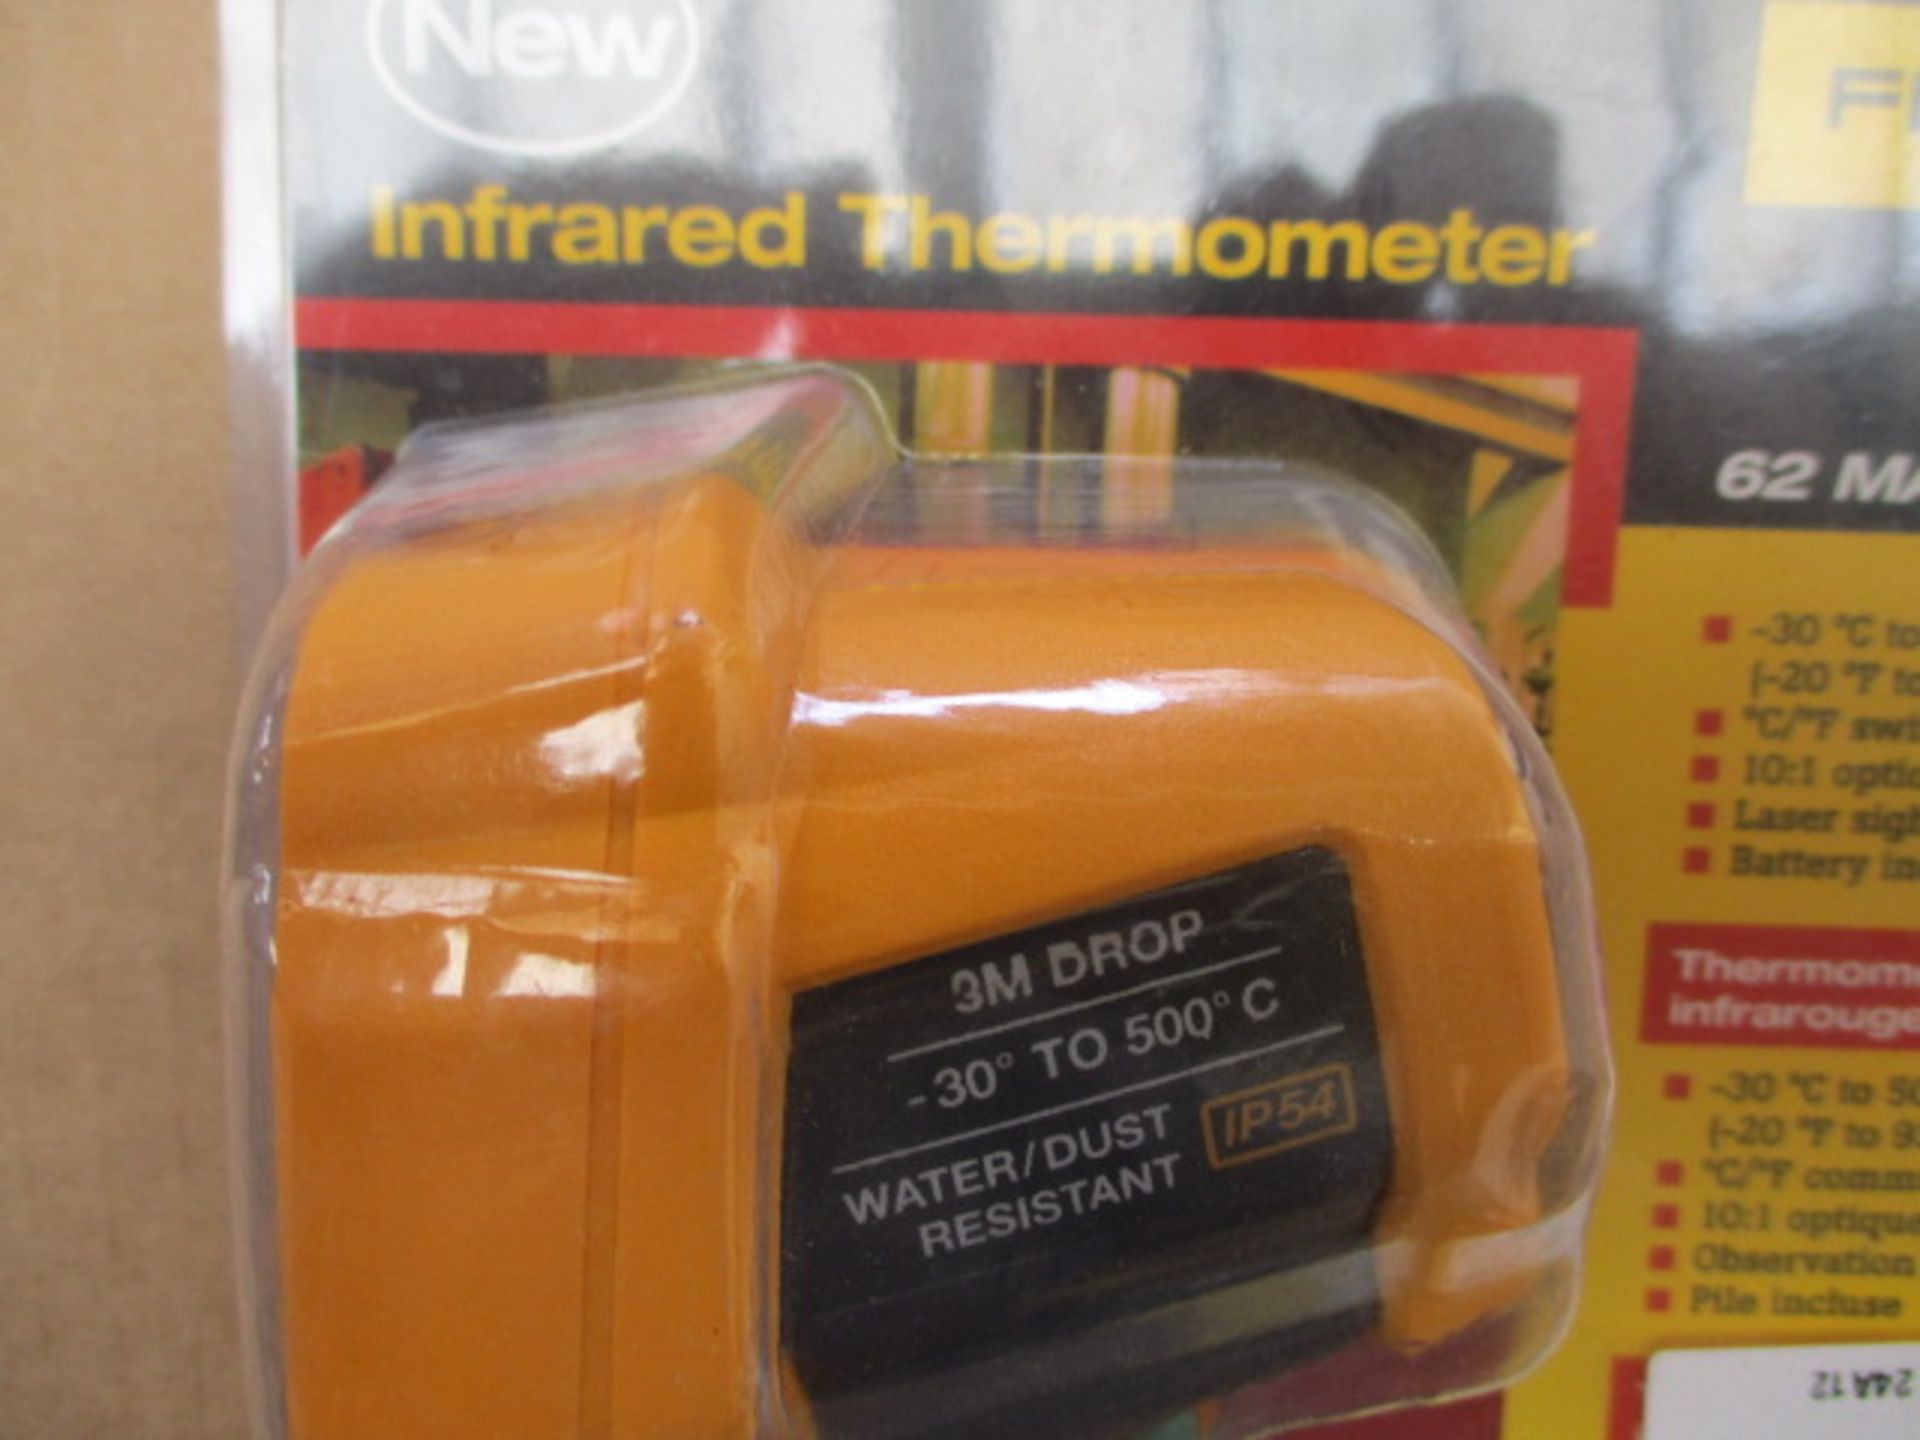 Infrared thermometer - Image 3 of 4